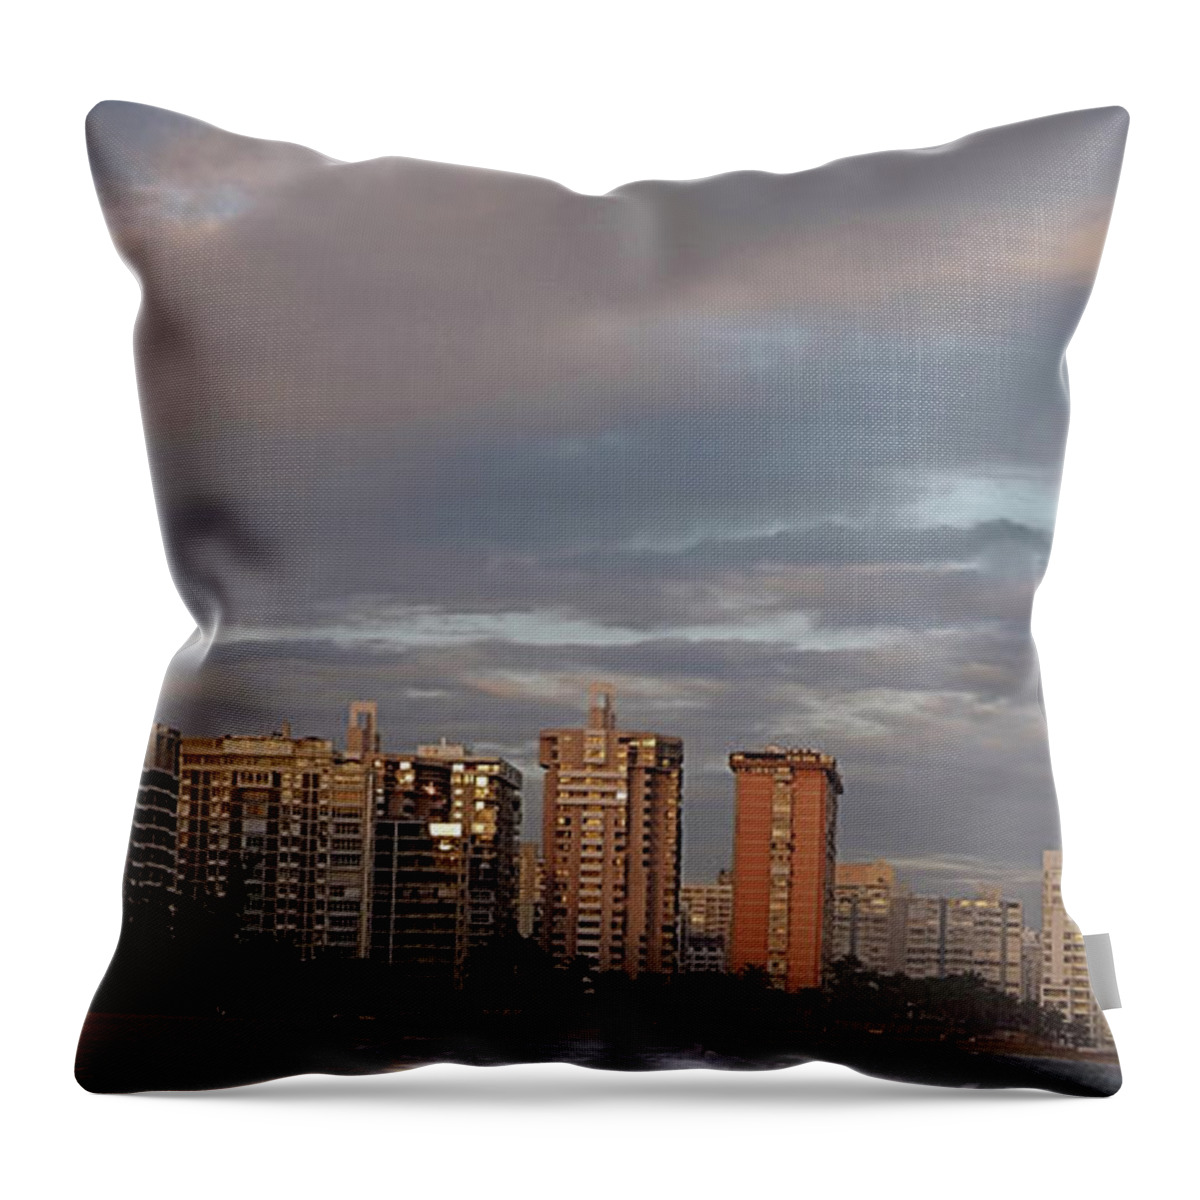 Isla Verde Throw Pillow featuring the photograph Isla Verde by Newwwman